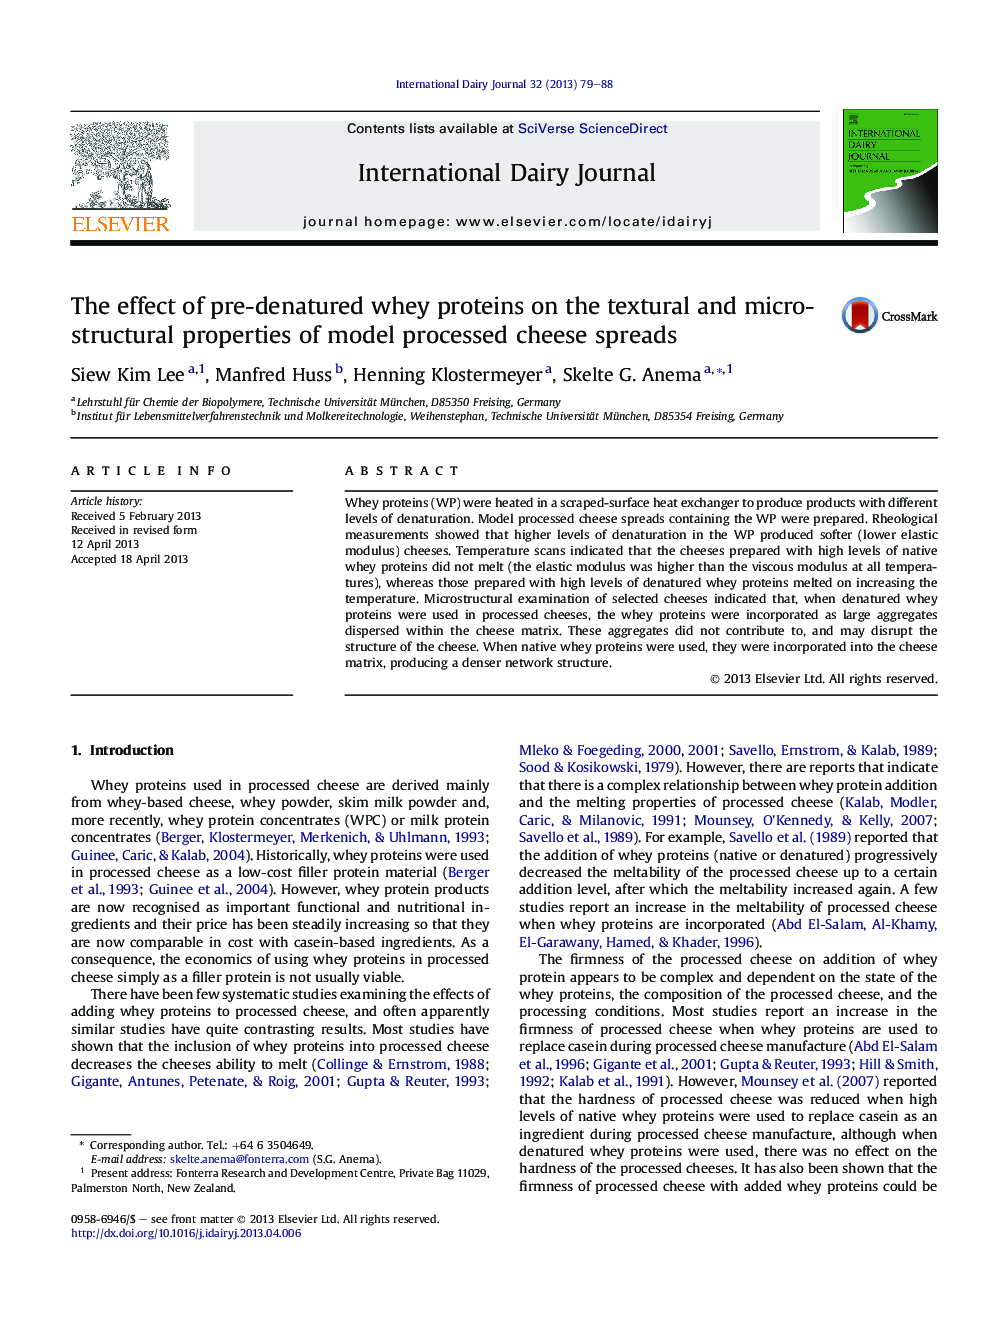 The effect of pre-denatured whey proteins on the textural and micro-structural properties of model processed cheese spreads